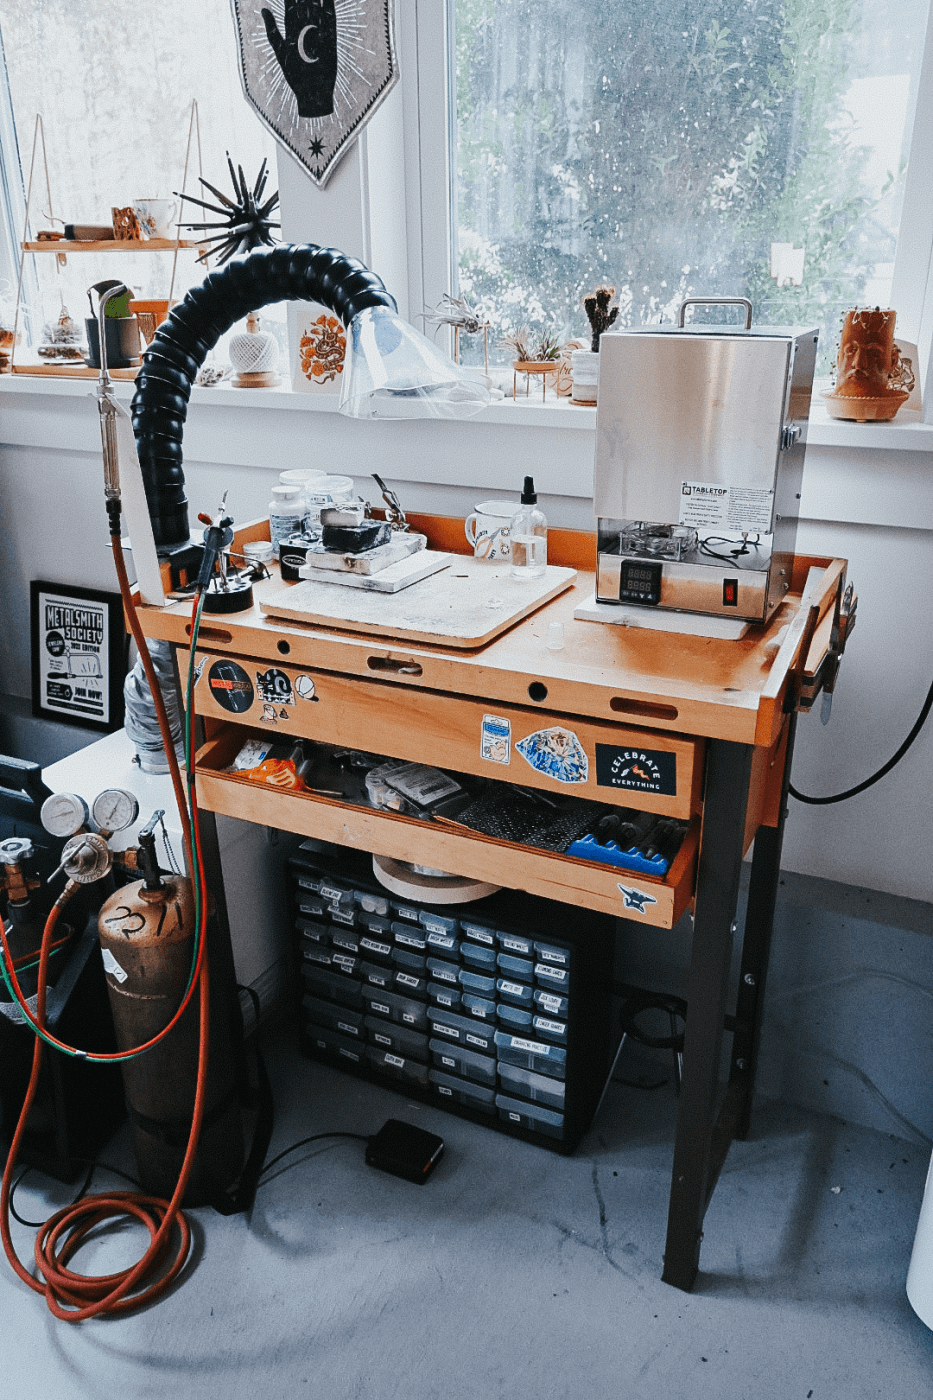 Soldering station for a jewelry studio